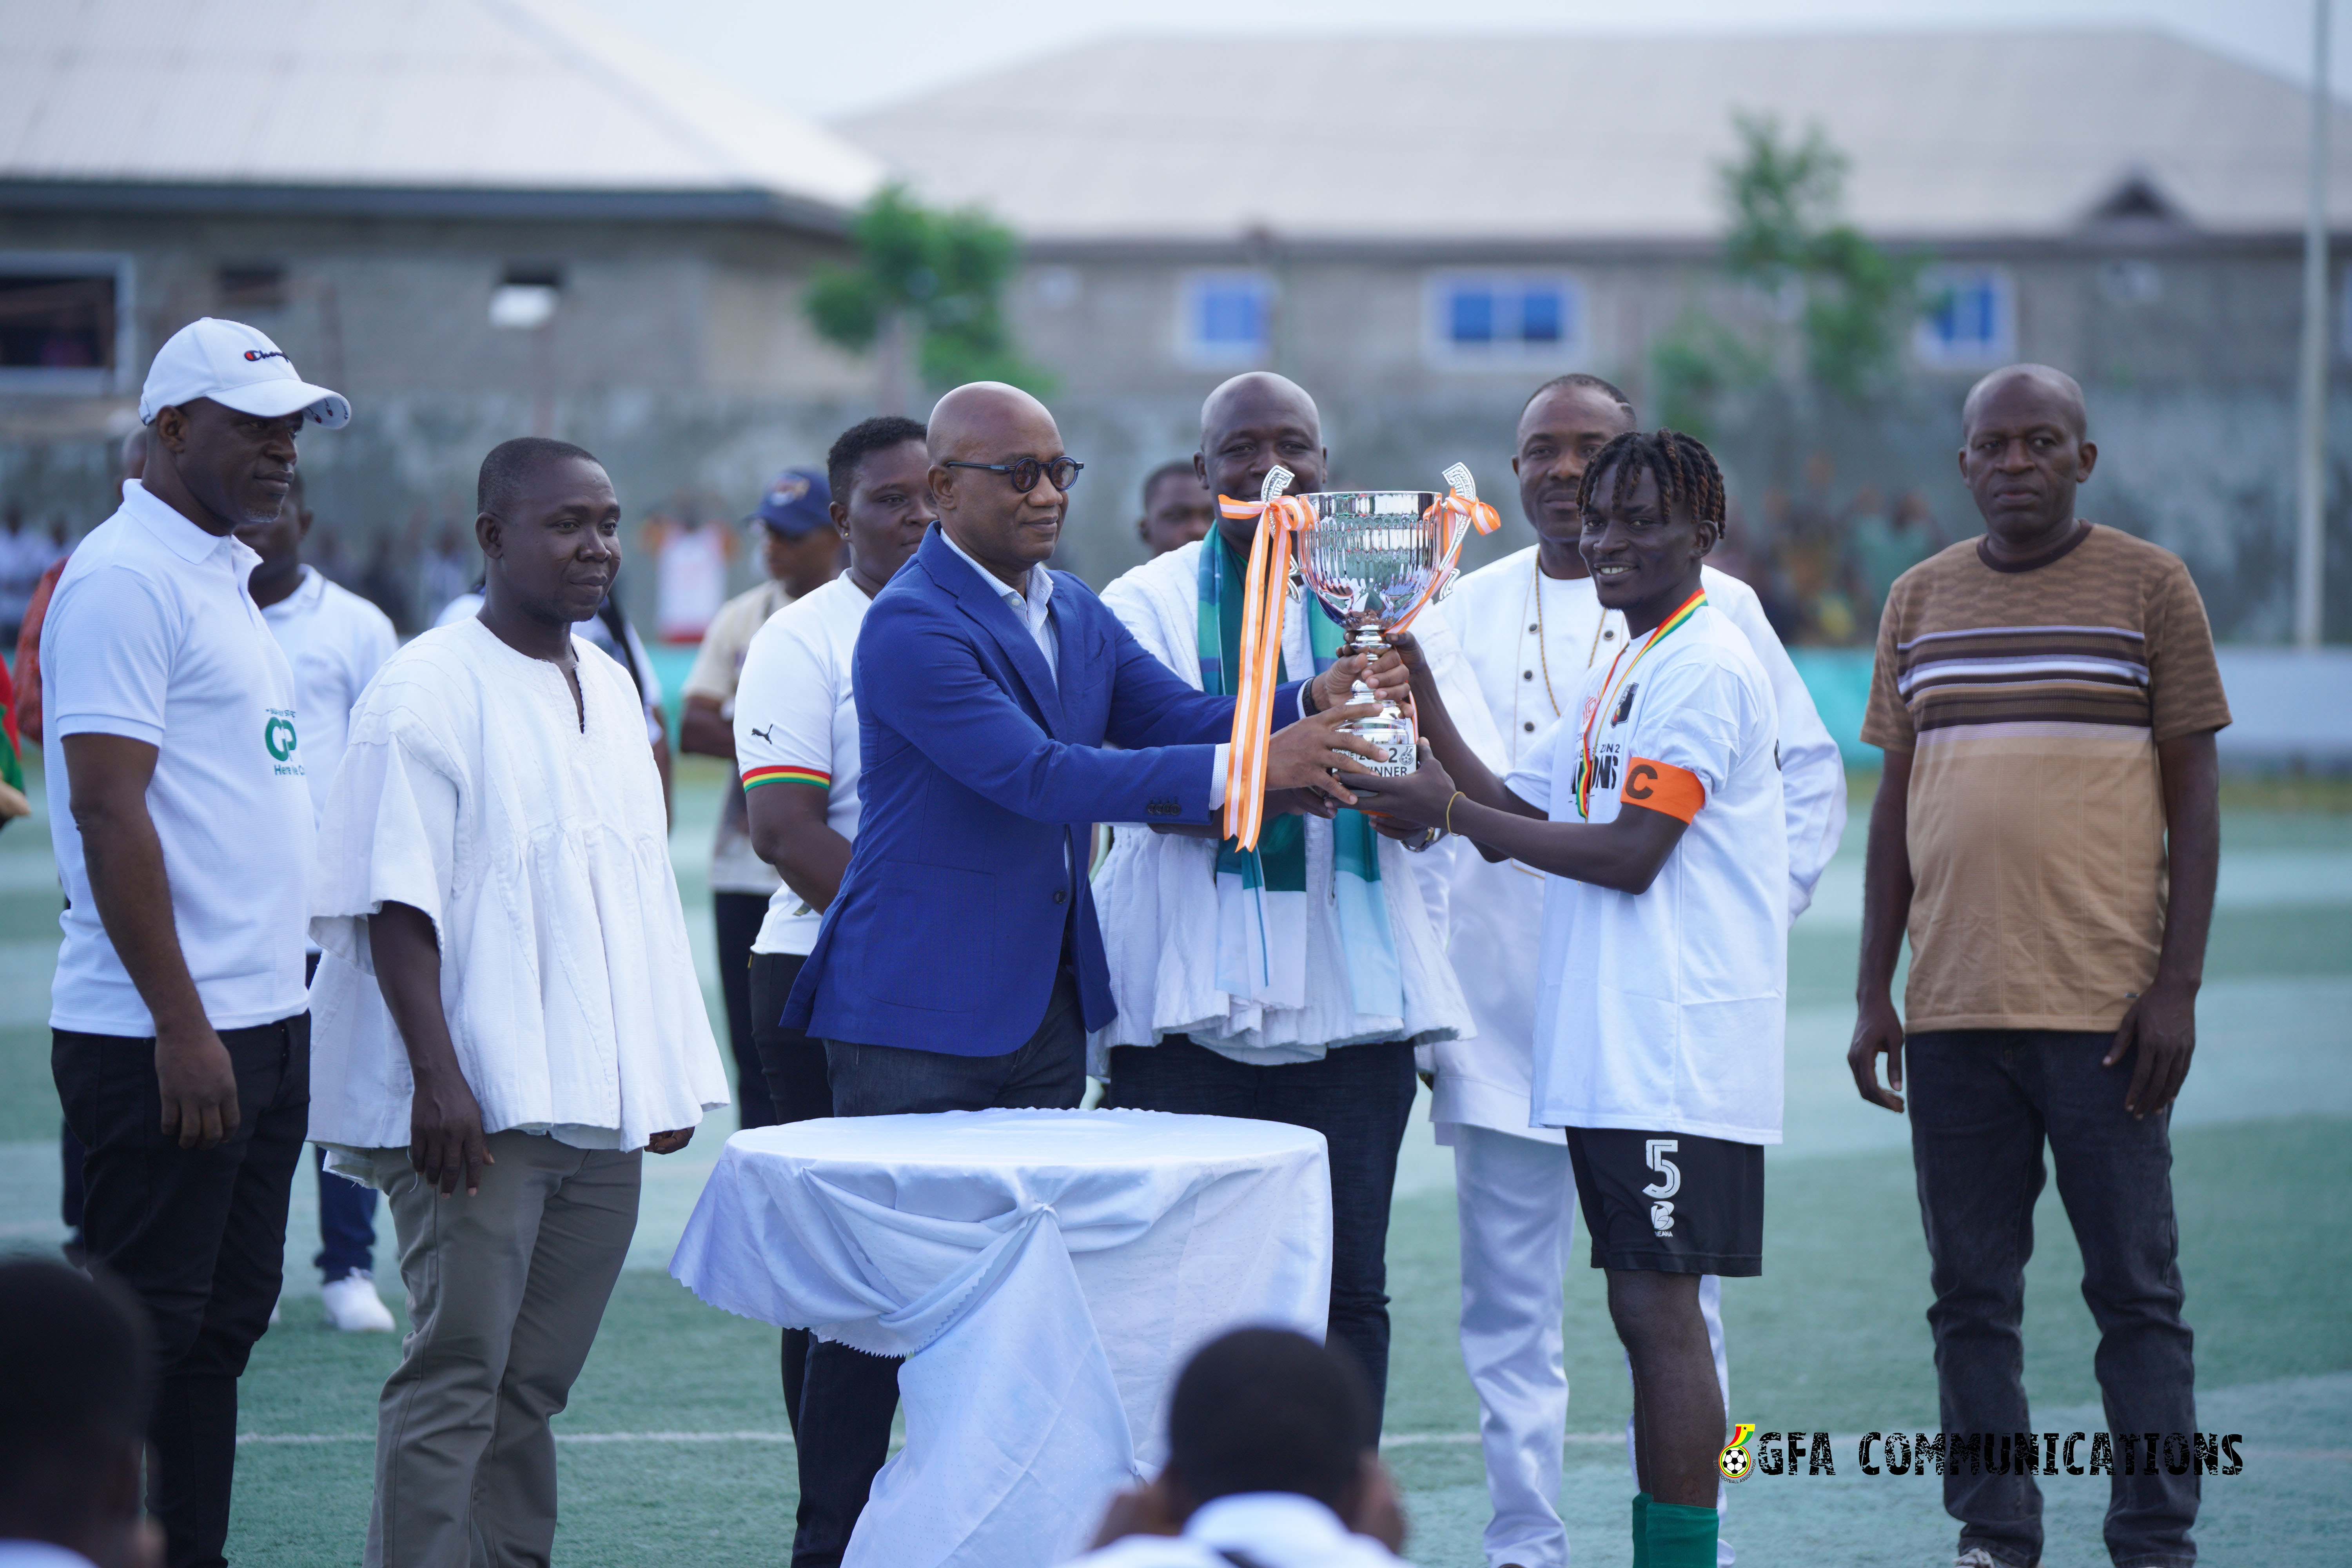 Euphoria at League Coronation Match as Basake Holy Stars crowned Champions of DOL Zone 2